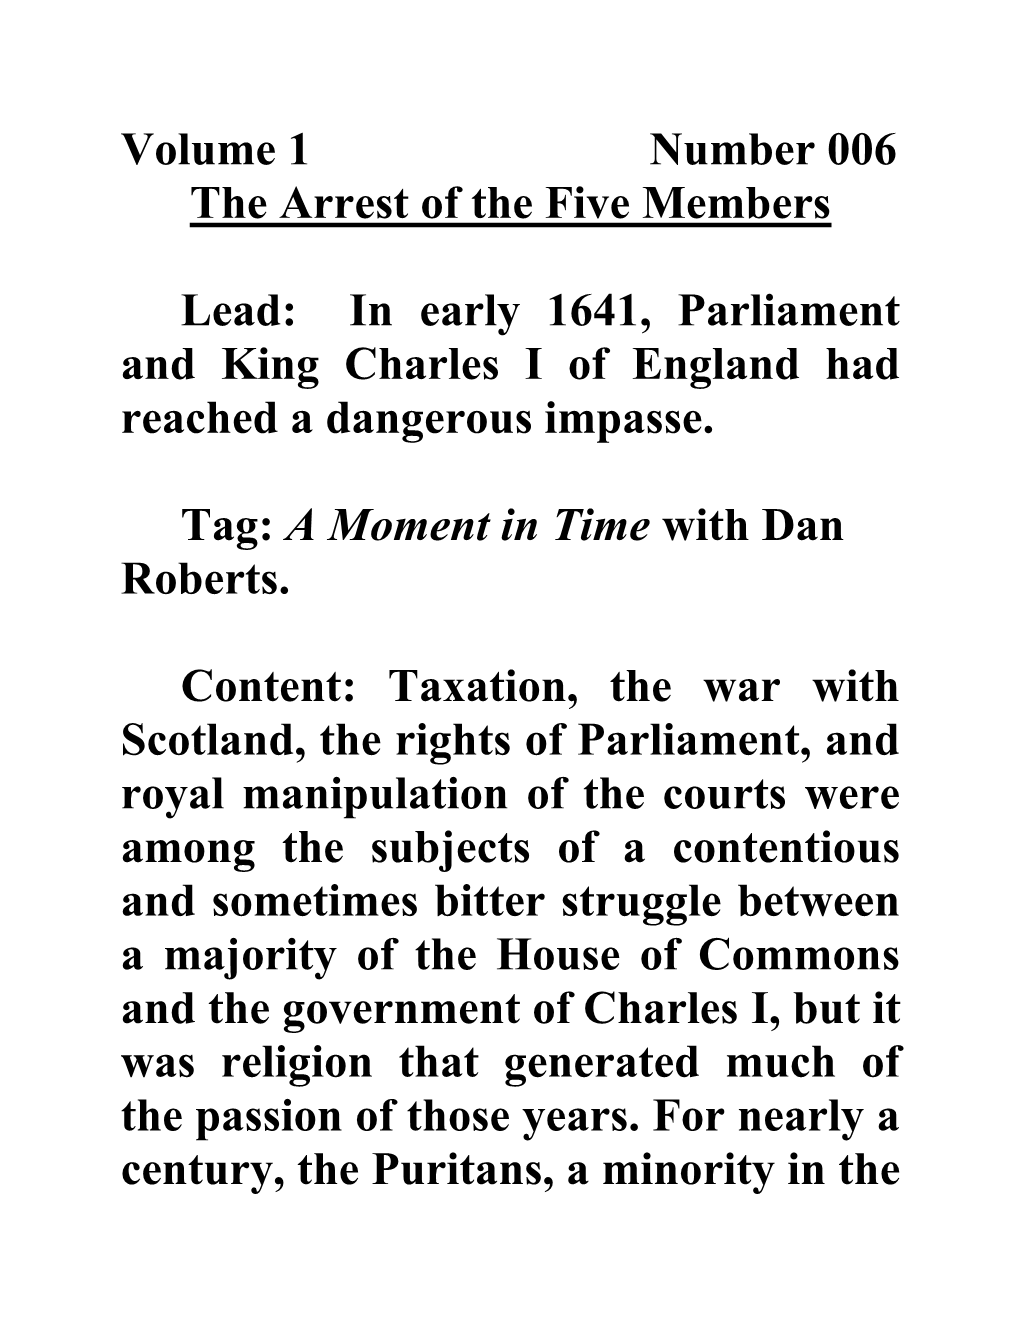 Volume 1 Number 006 the Arrest of the Five Members Lead: in Early